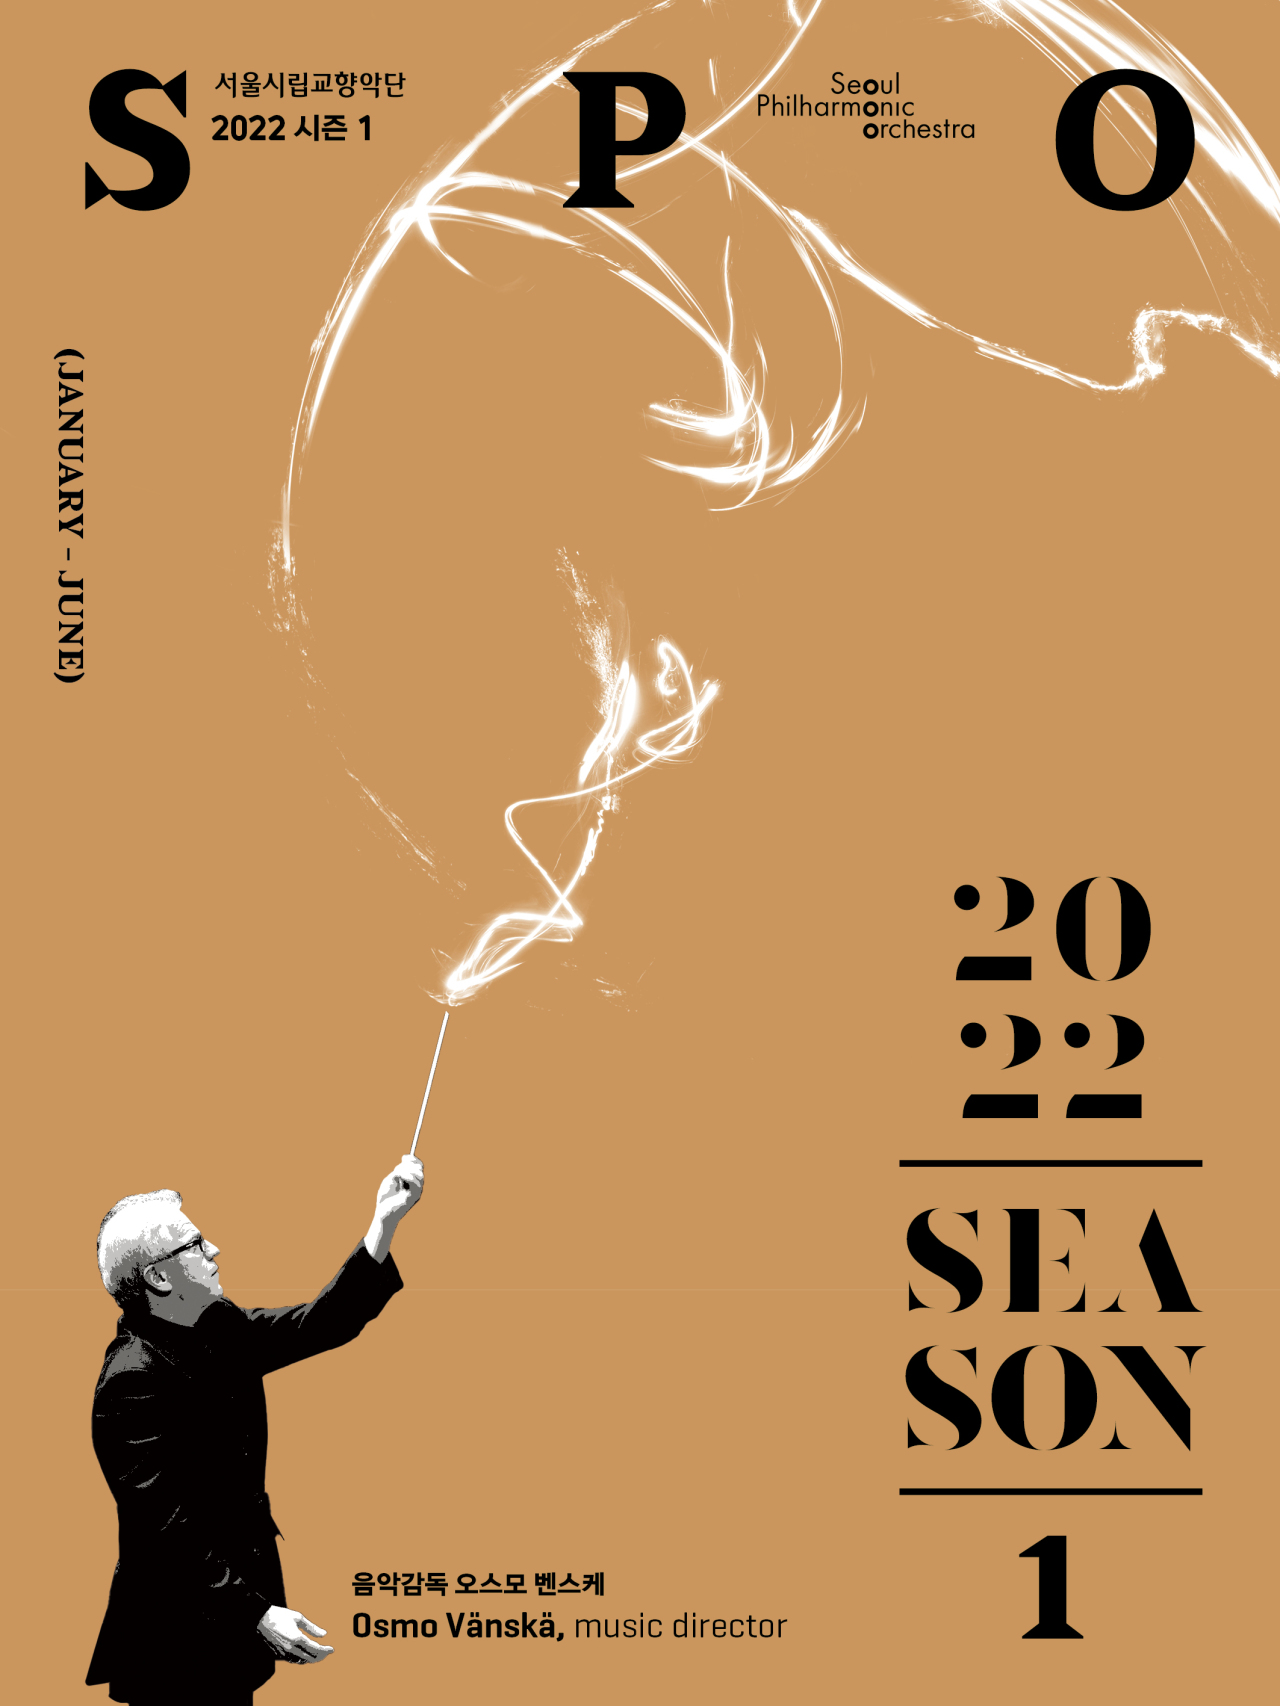 The Seoul Philharmomic Orchestra's poster for the first season of 2022. (SPO)